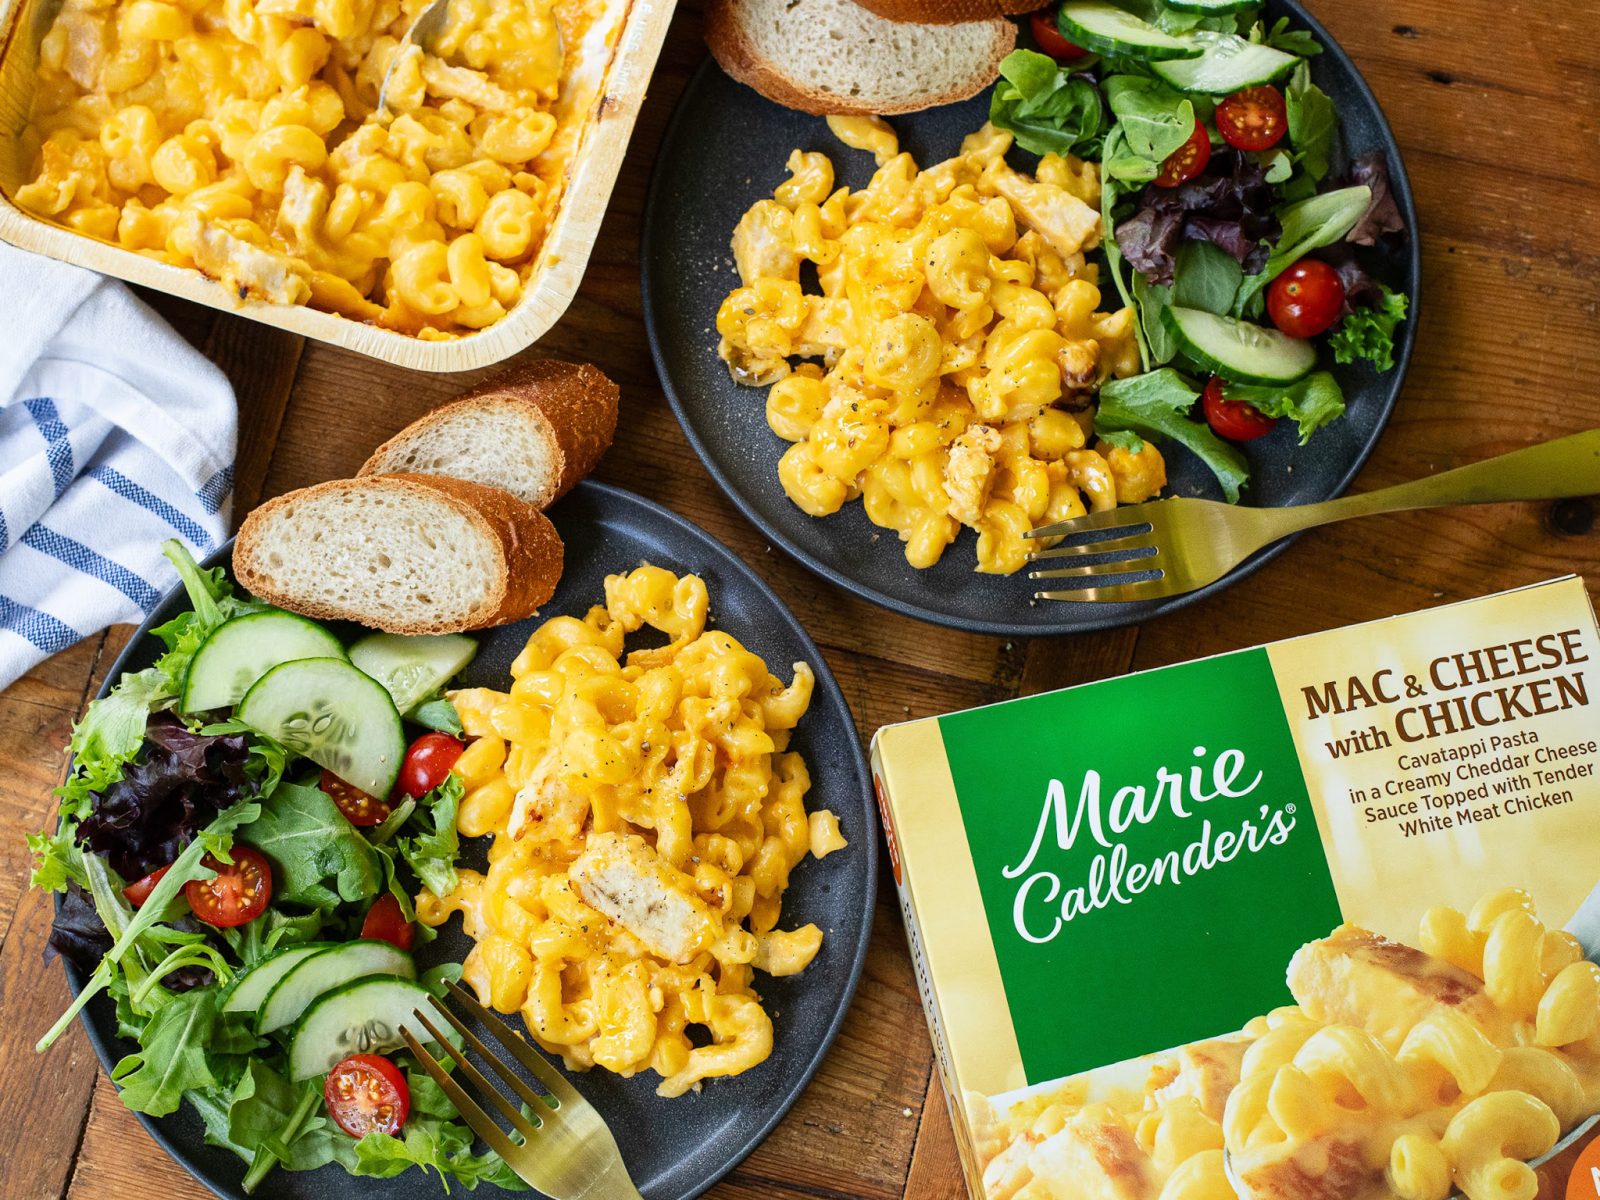 Enjoy A Delicious Family Meal Without A Lot Of Prep Or Cleanup – Bring Home Frozen Faves & Save BIG At Publix